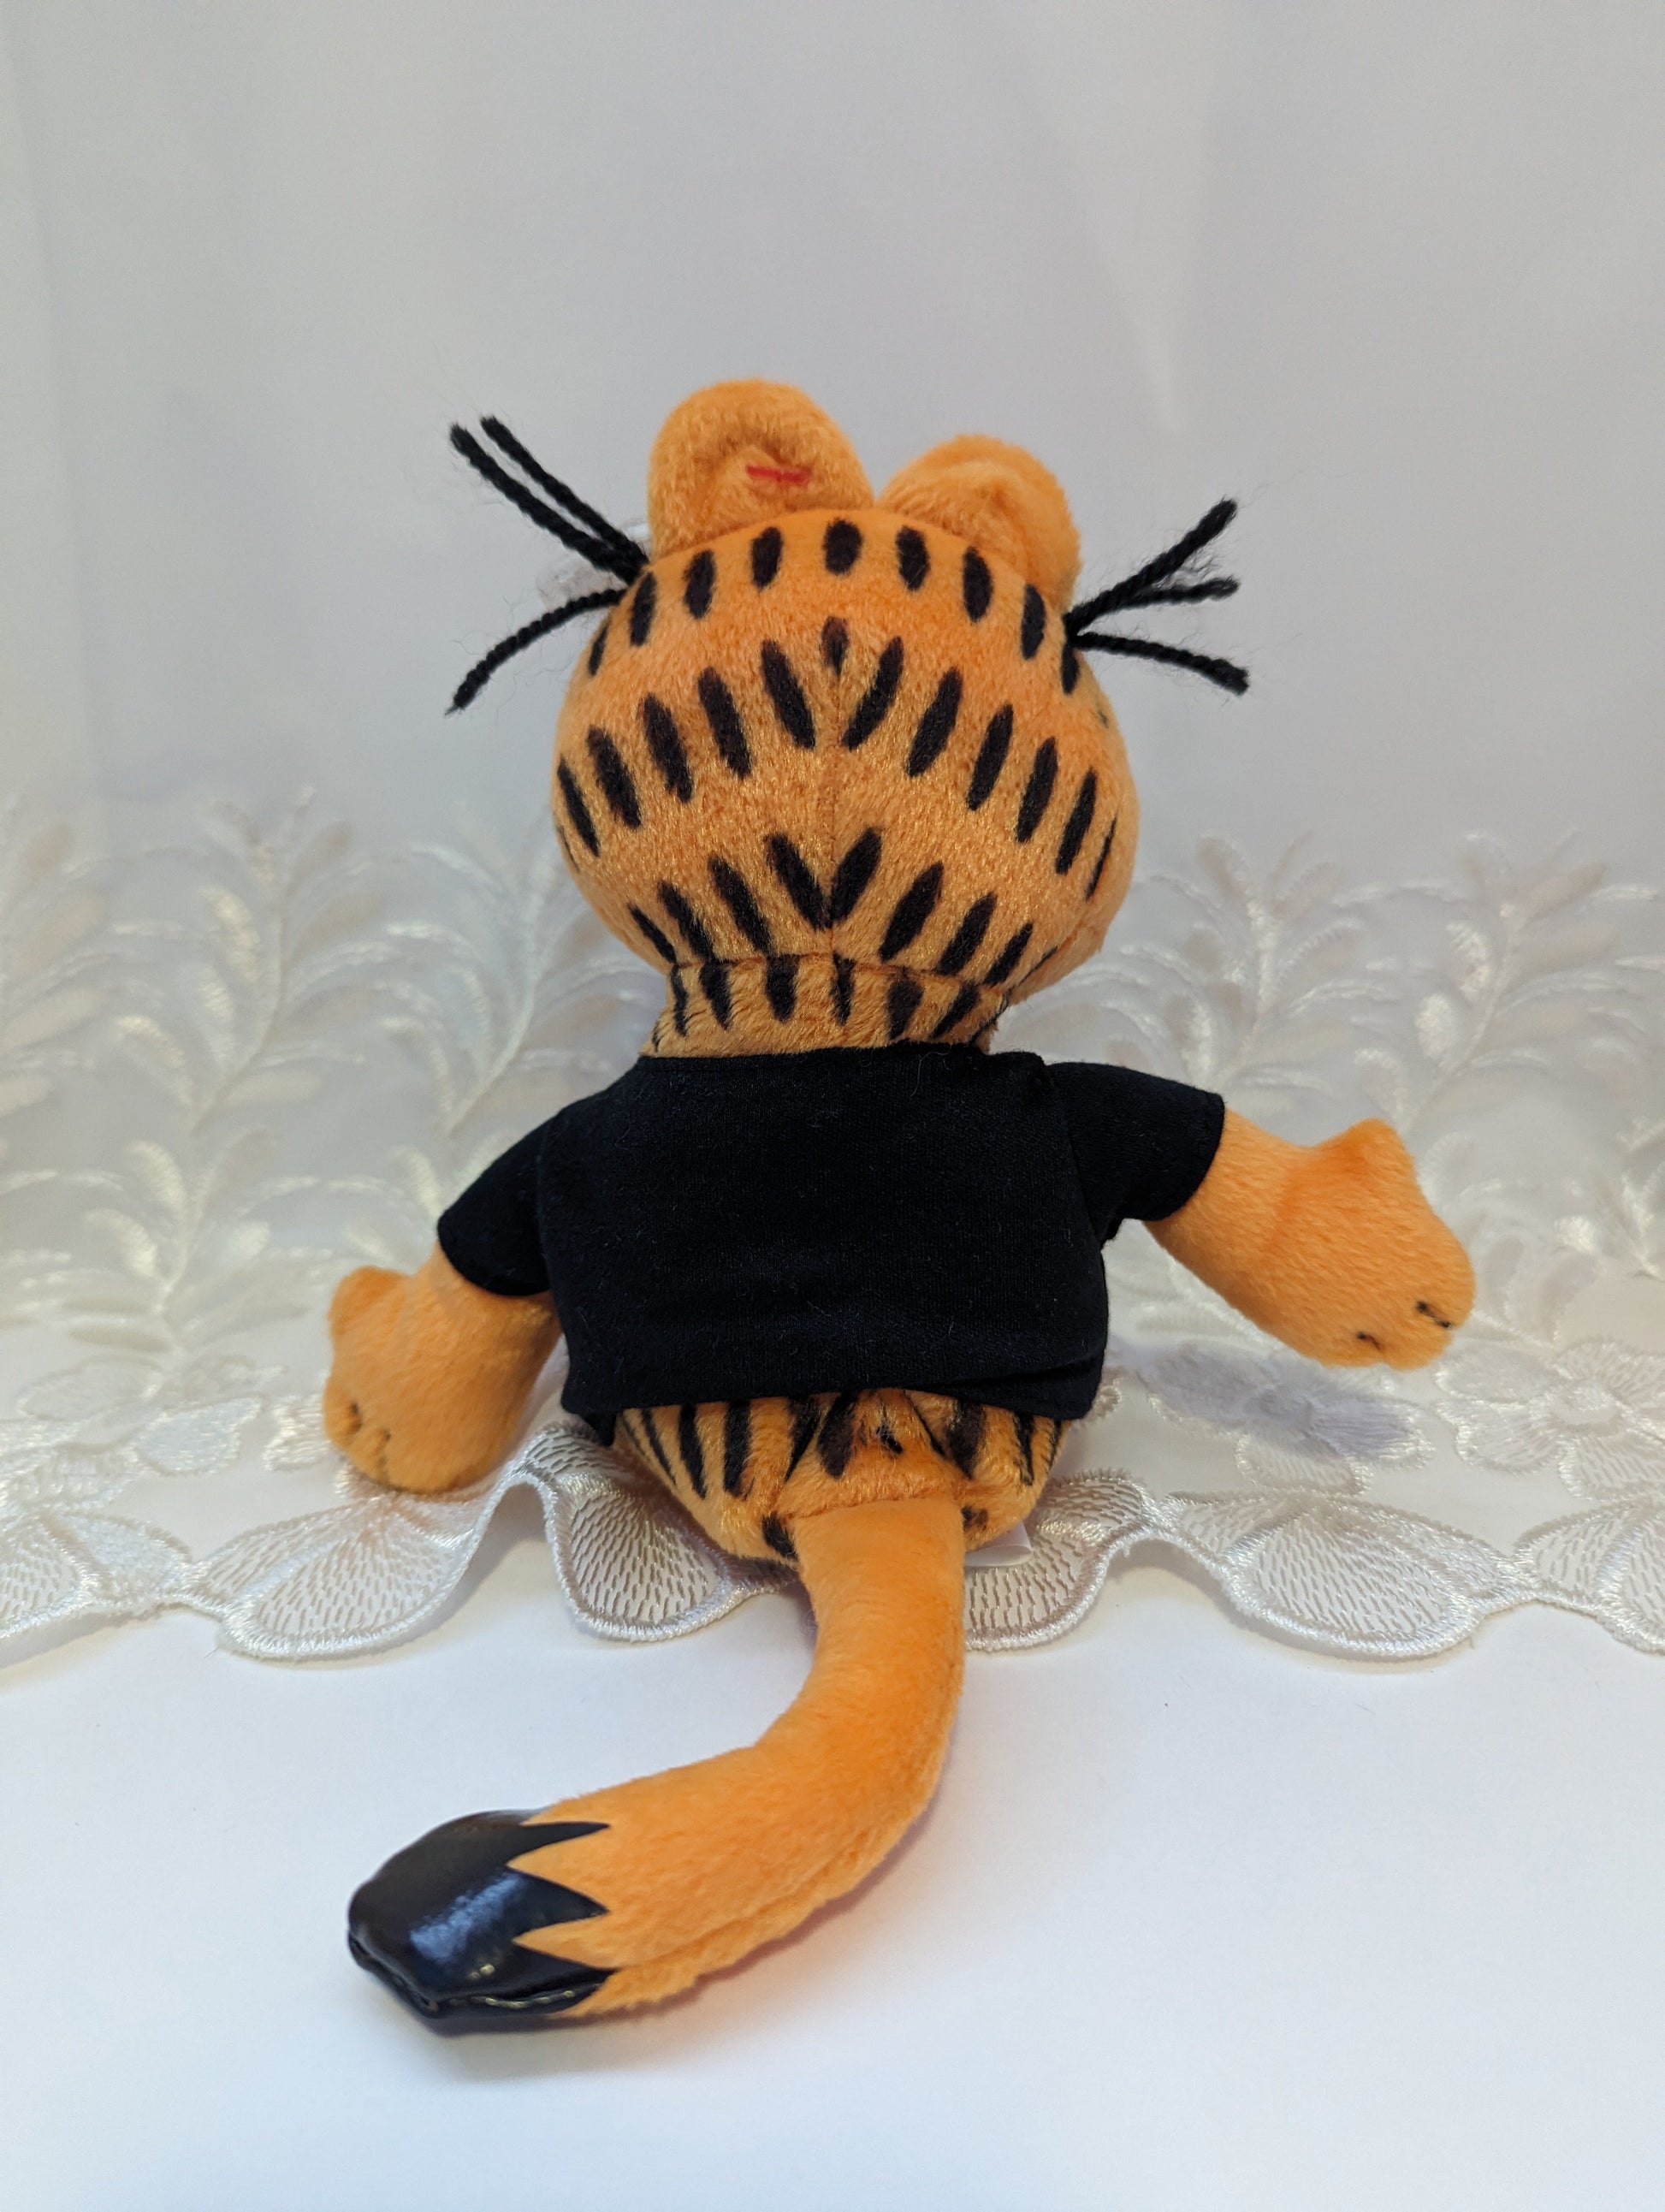 Ty Beanie Baby - Garfield With "I Don't Do Perky" Shirt On (8in) - Vintage Beanies Canada